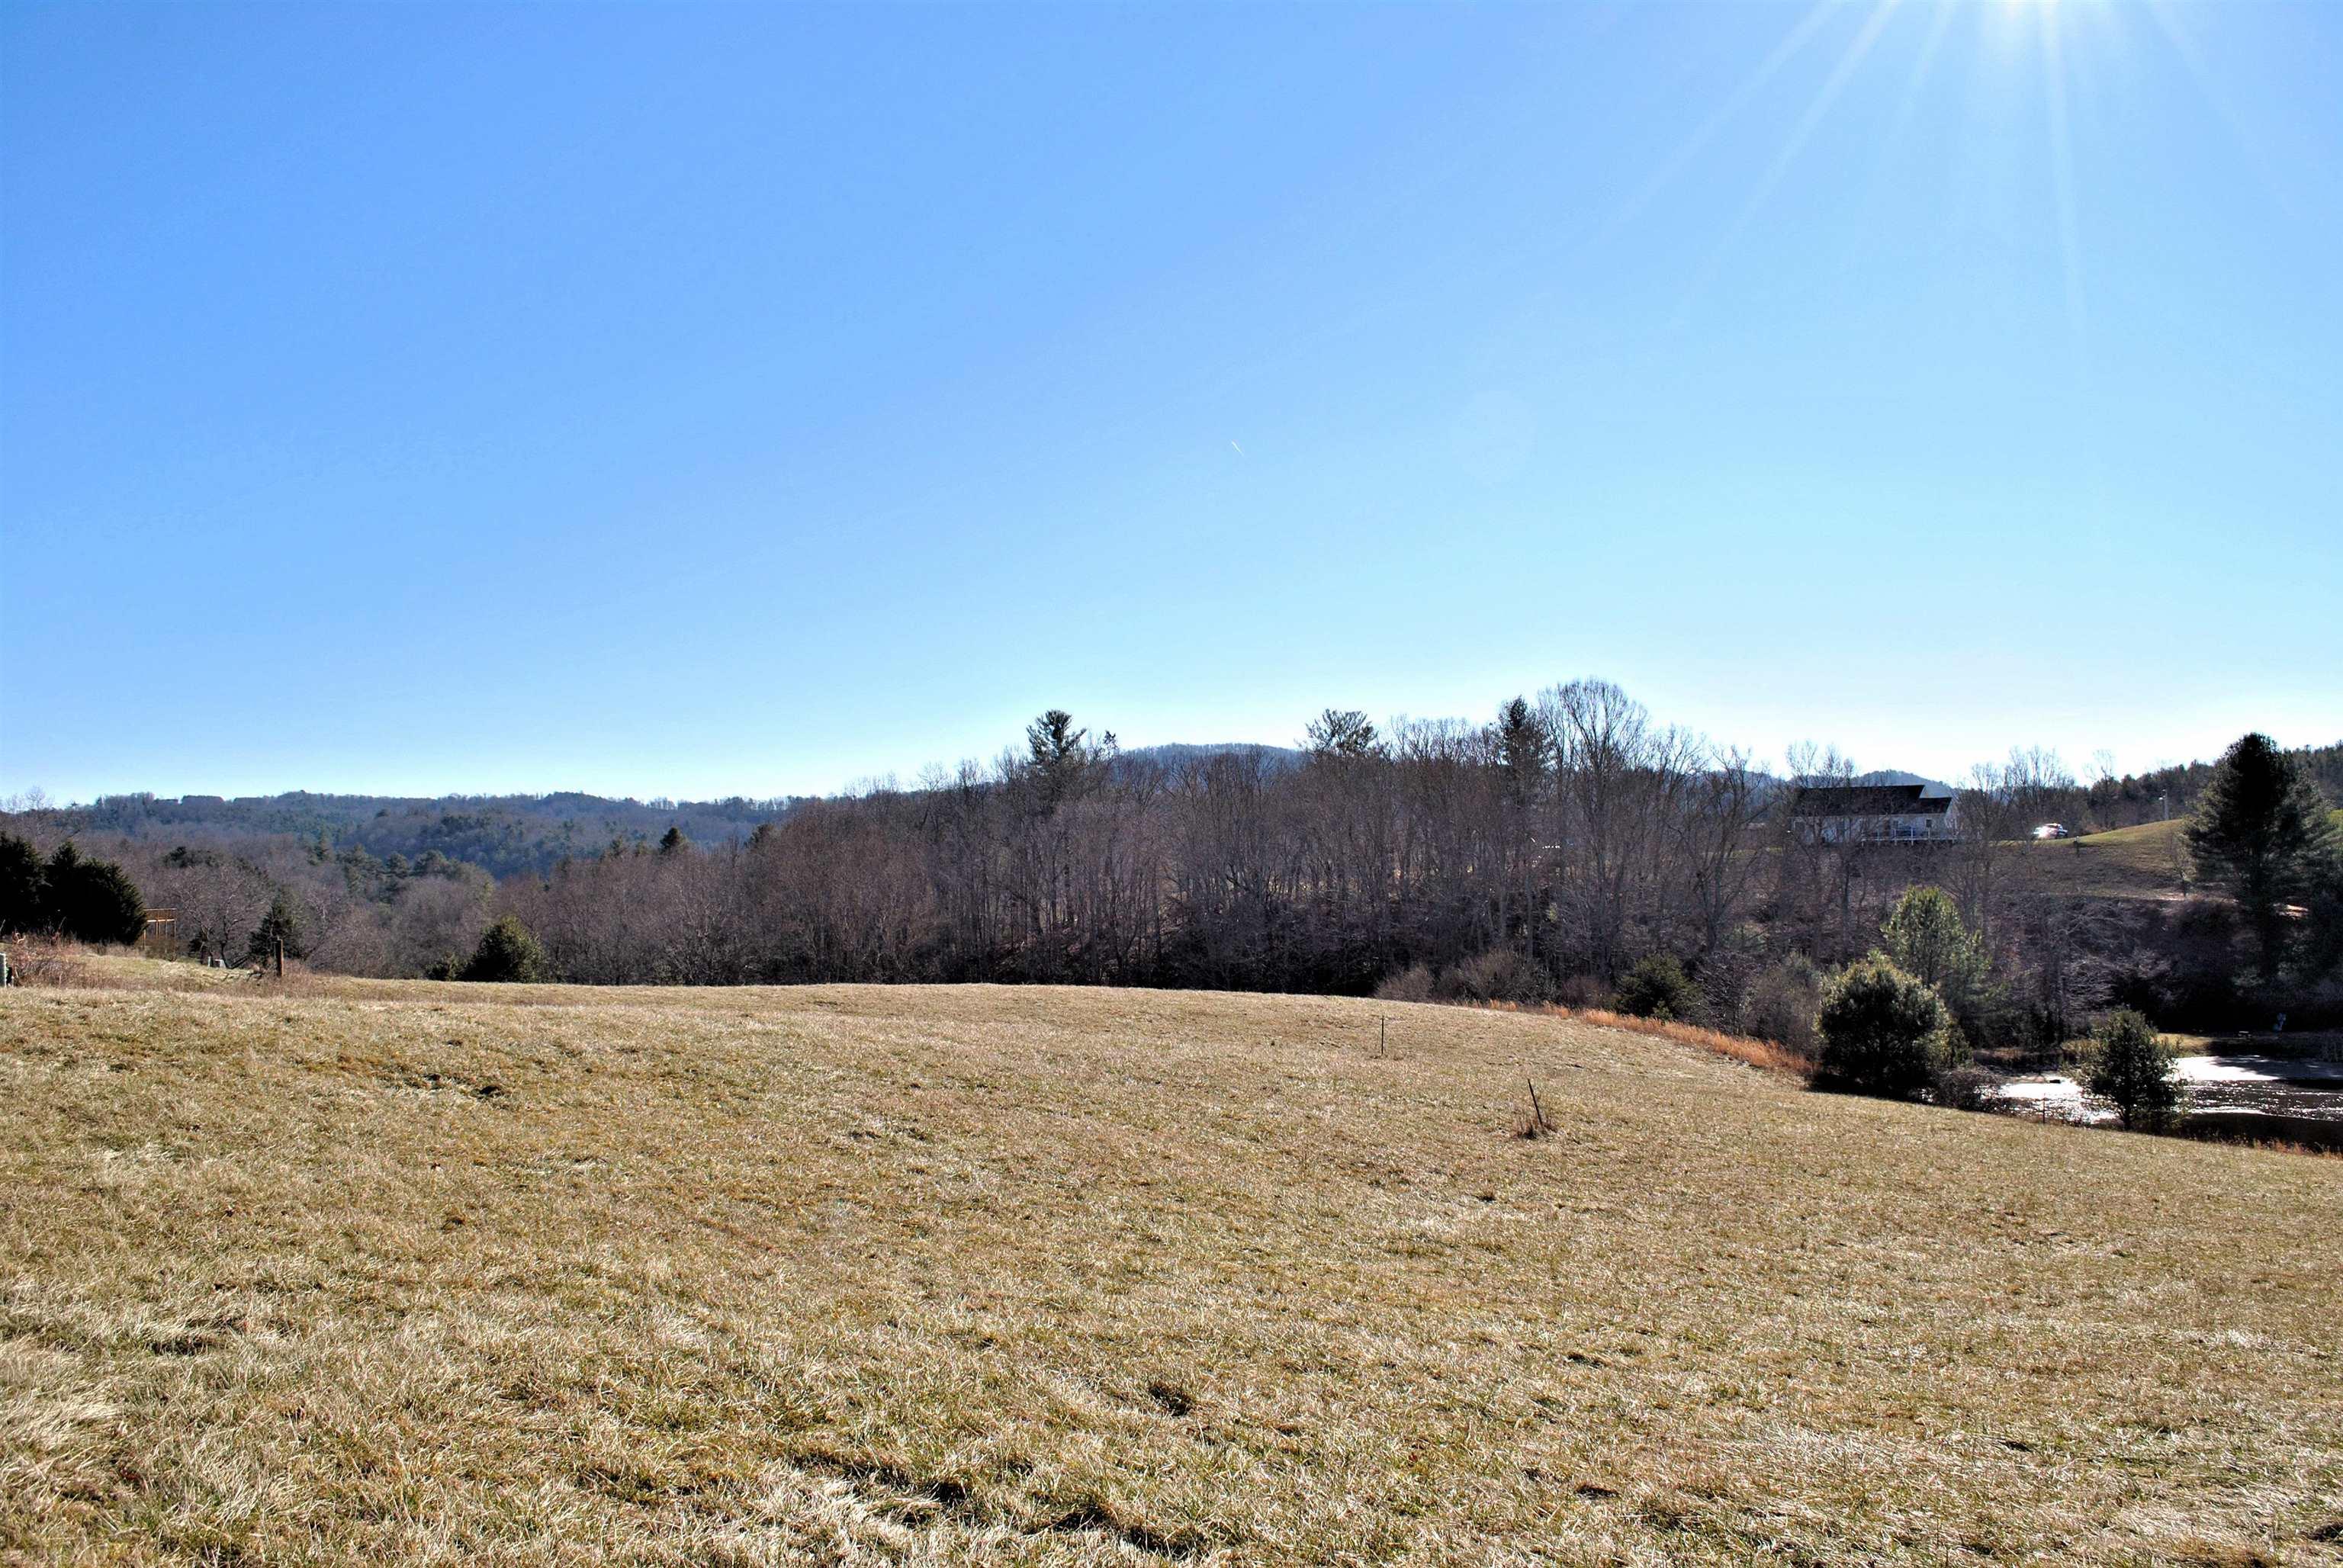 Build your dream on this open lot with great mountain views near the end of a cul-de-sac with pond frontage!  Property has High Speed Internet available with Fiber Optic Cable at the property so you can work from home!  The property has perk test completed for a 3 bedroom home.  Conveniently located within 15 to 20 minutes to I-81, Christiansburg, Blacksburg, VT, Radford, RU, Carilion Hospital, Montgomery Regional Hospital, etc... Country living at is finest!  Call for a private showing!